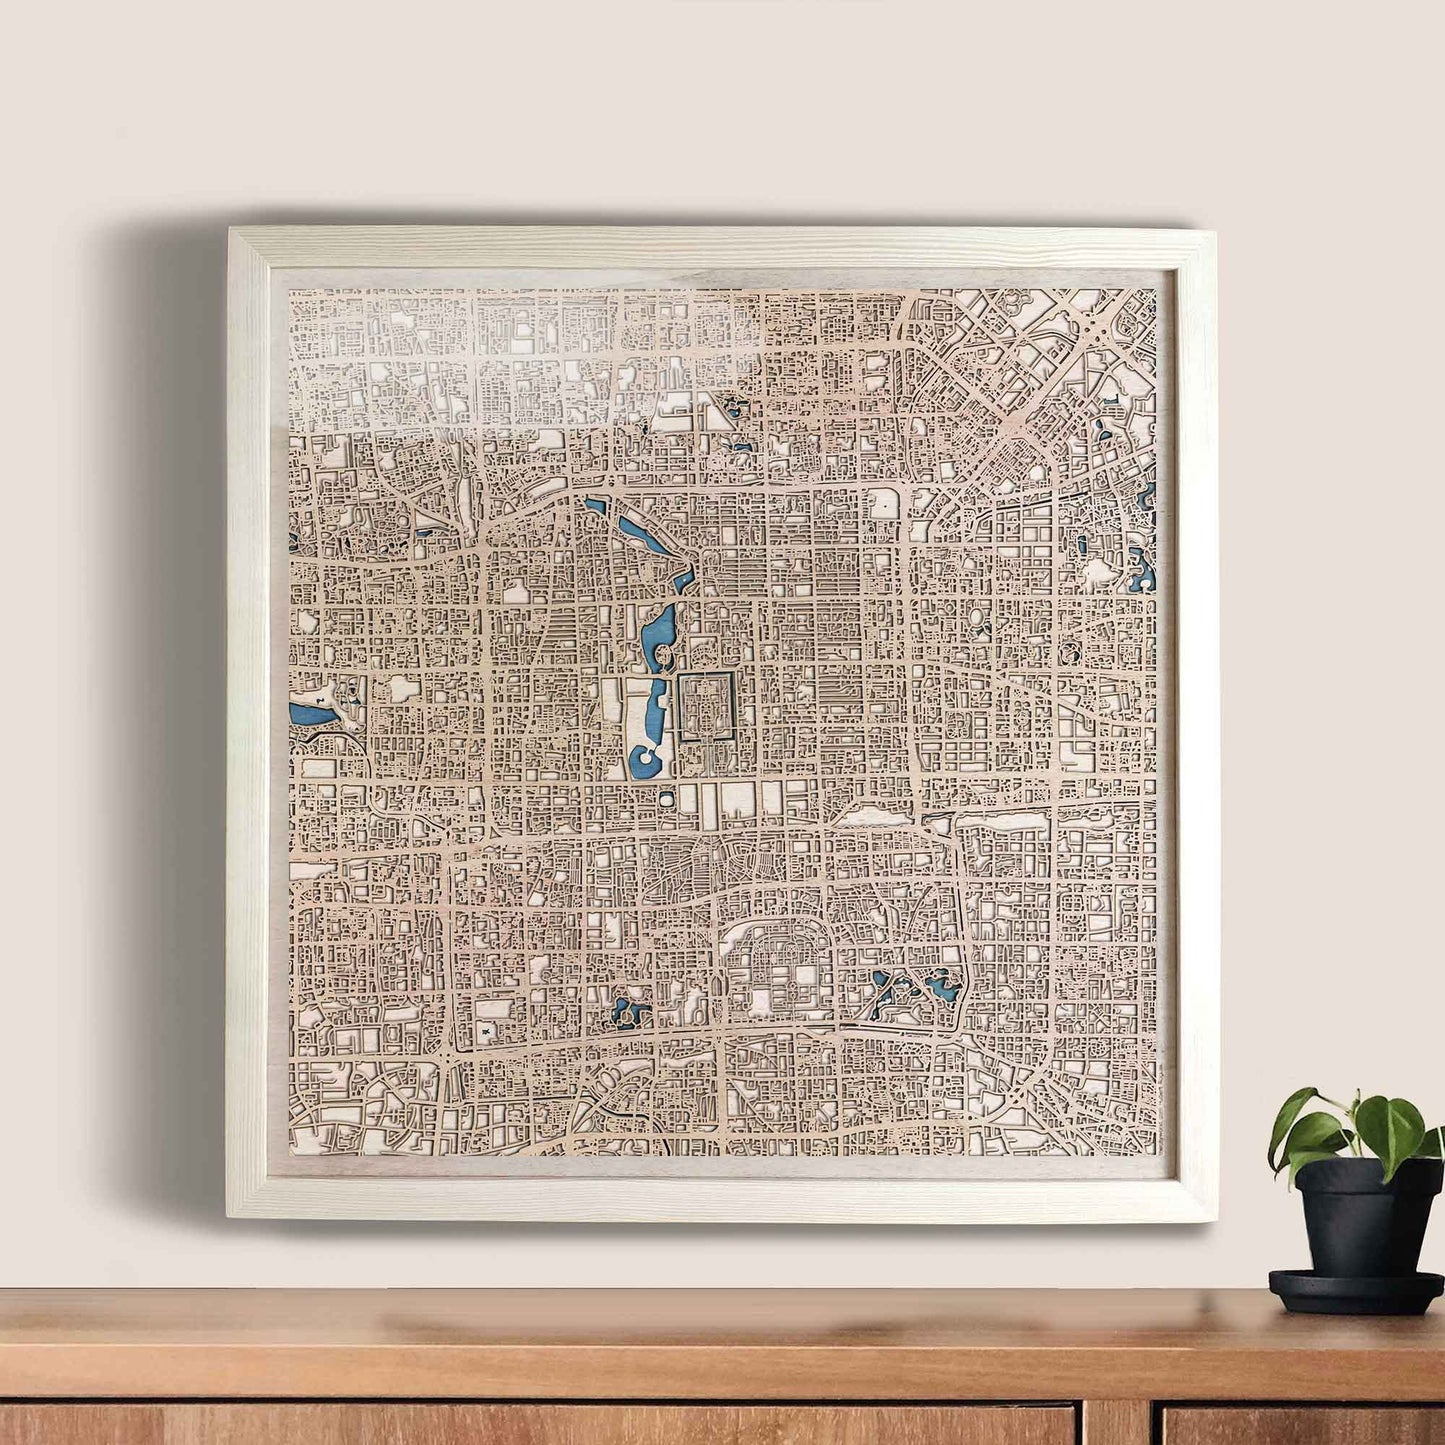 Beijing Wooden Map by CityWood - Custom Wood Map Art - Unique Laser Cut Engraved - Anniversary Gift